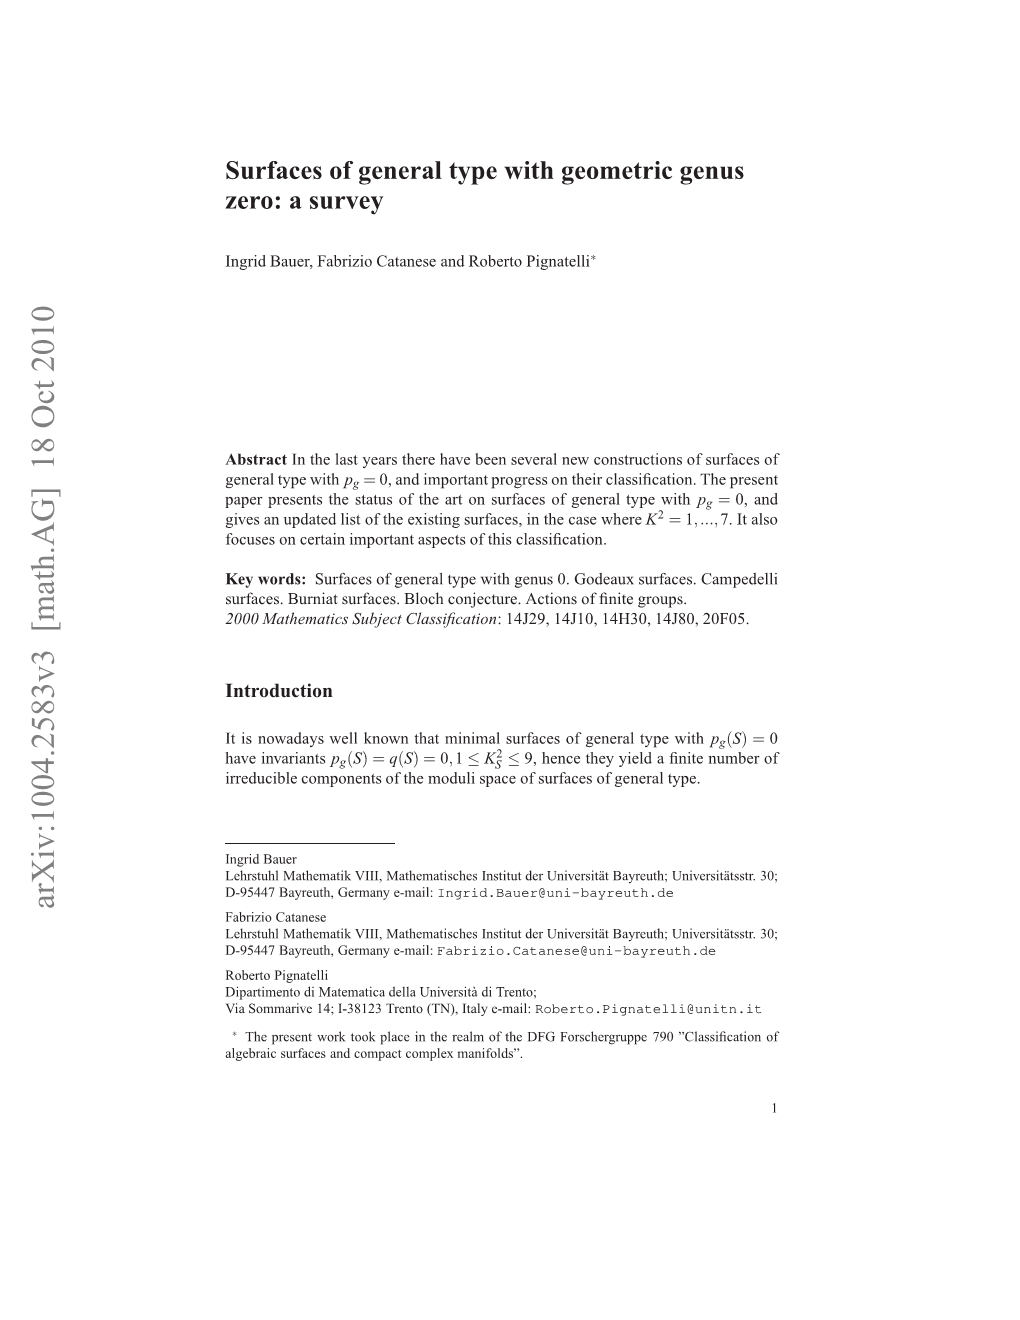 Surfaces of General Type with Geometric Genus Zero: a Survey 3